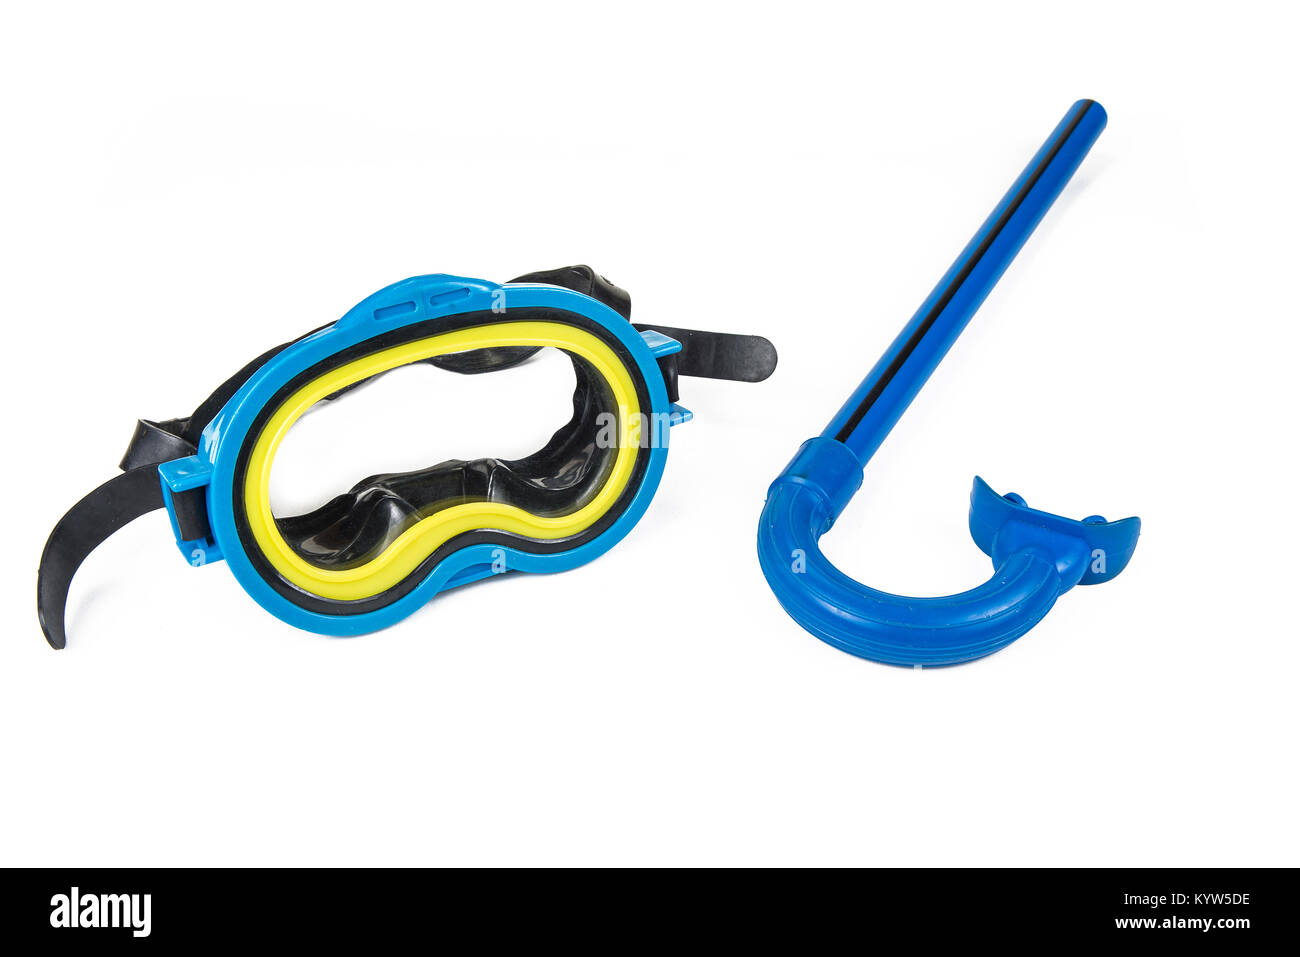 Snorkeling equipment: snorkel and diving google on the white background Stock Photo